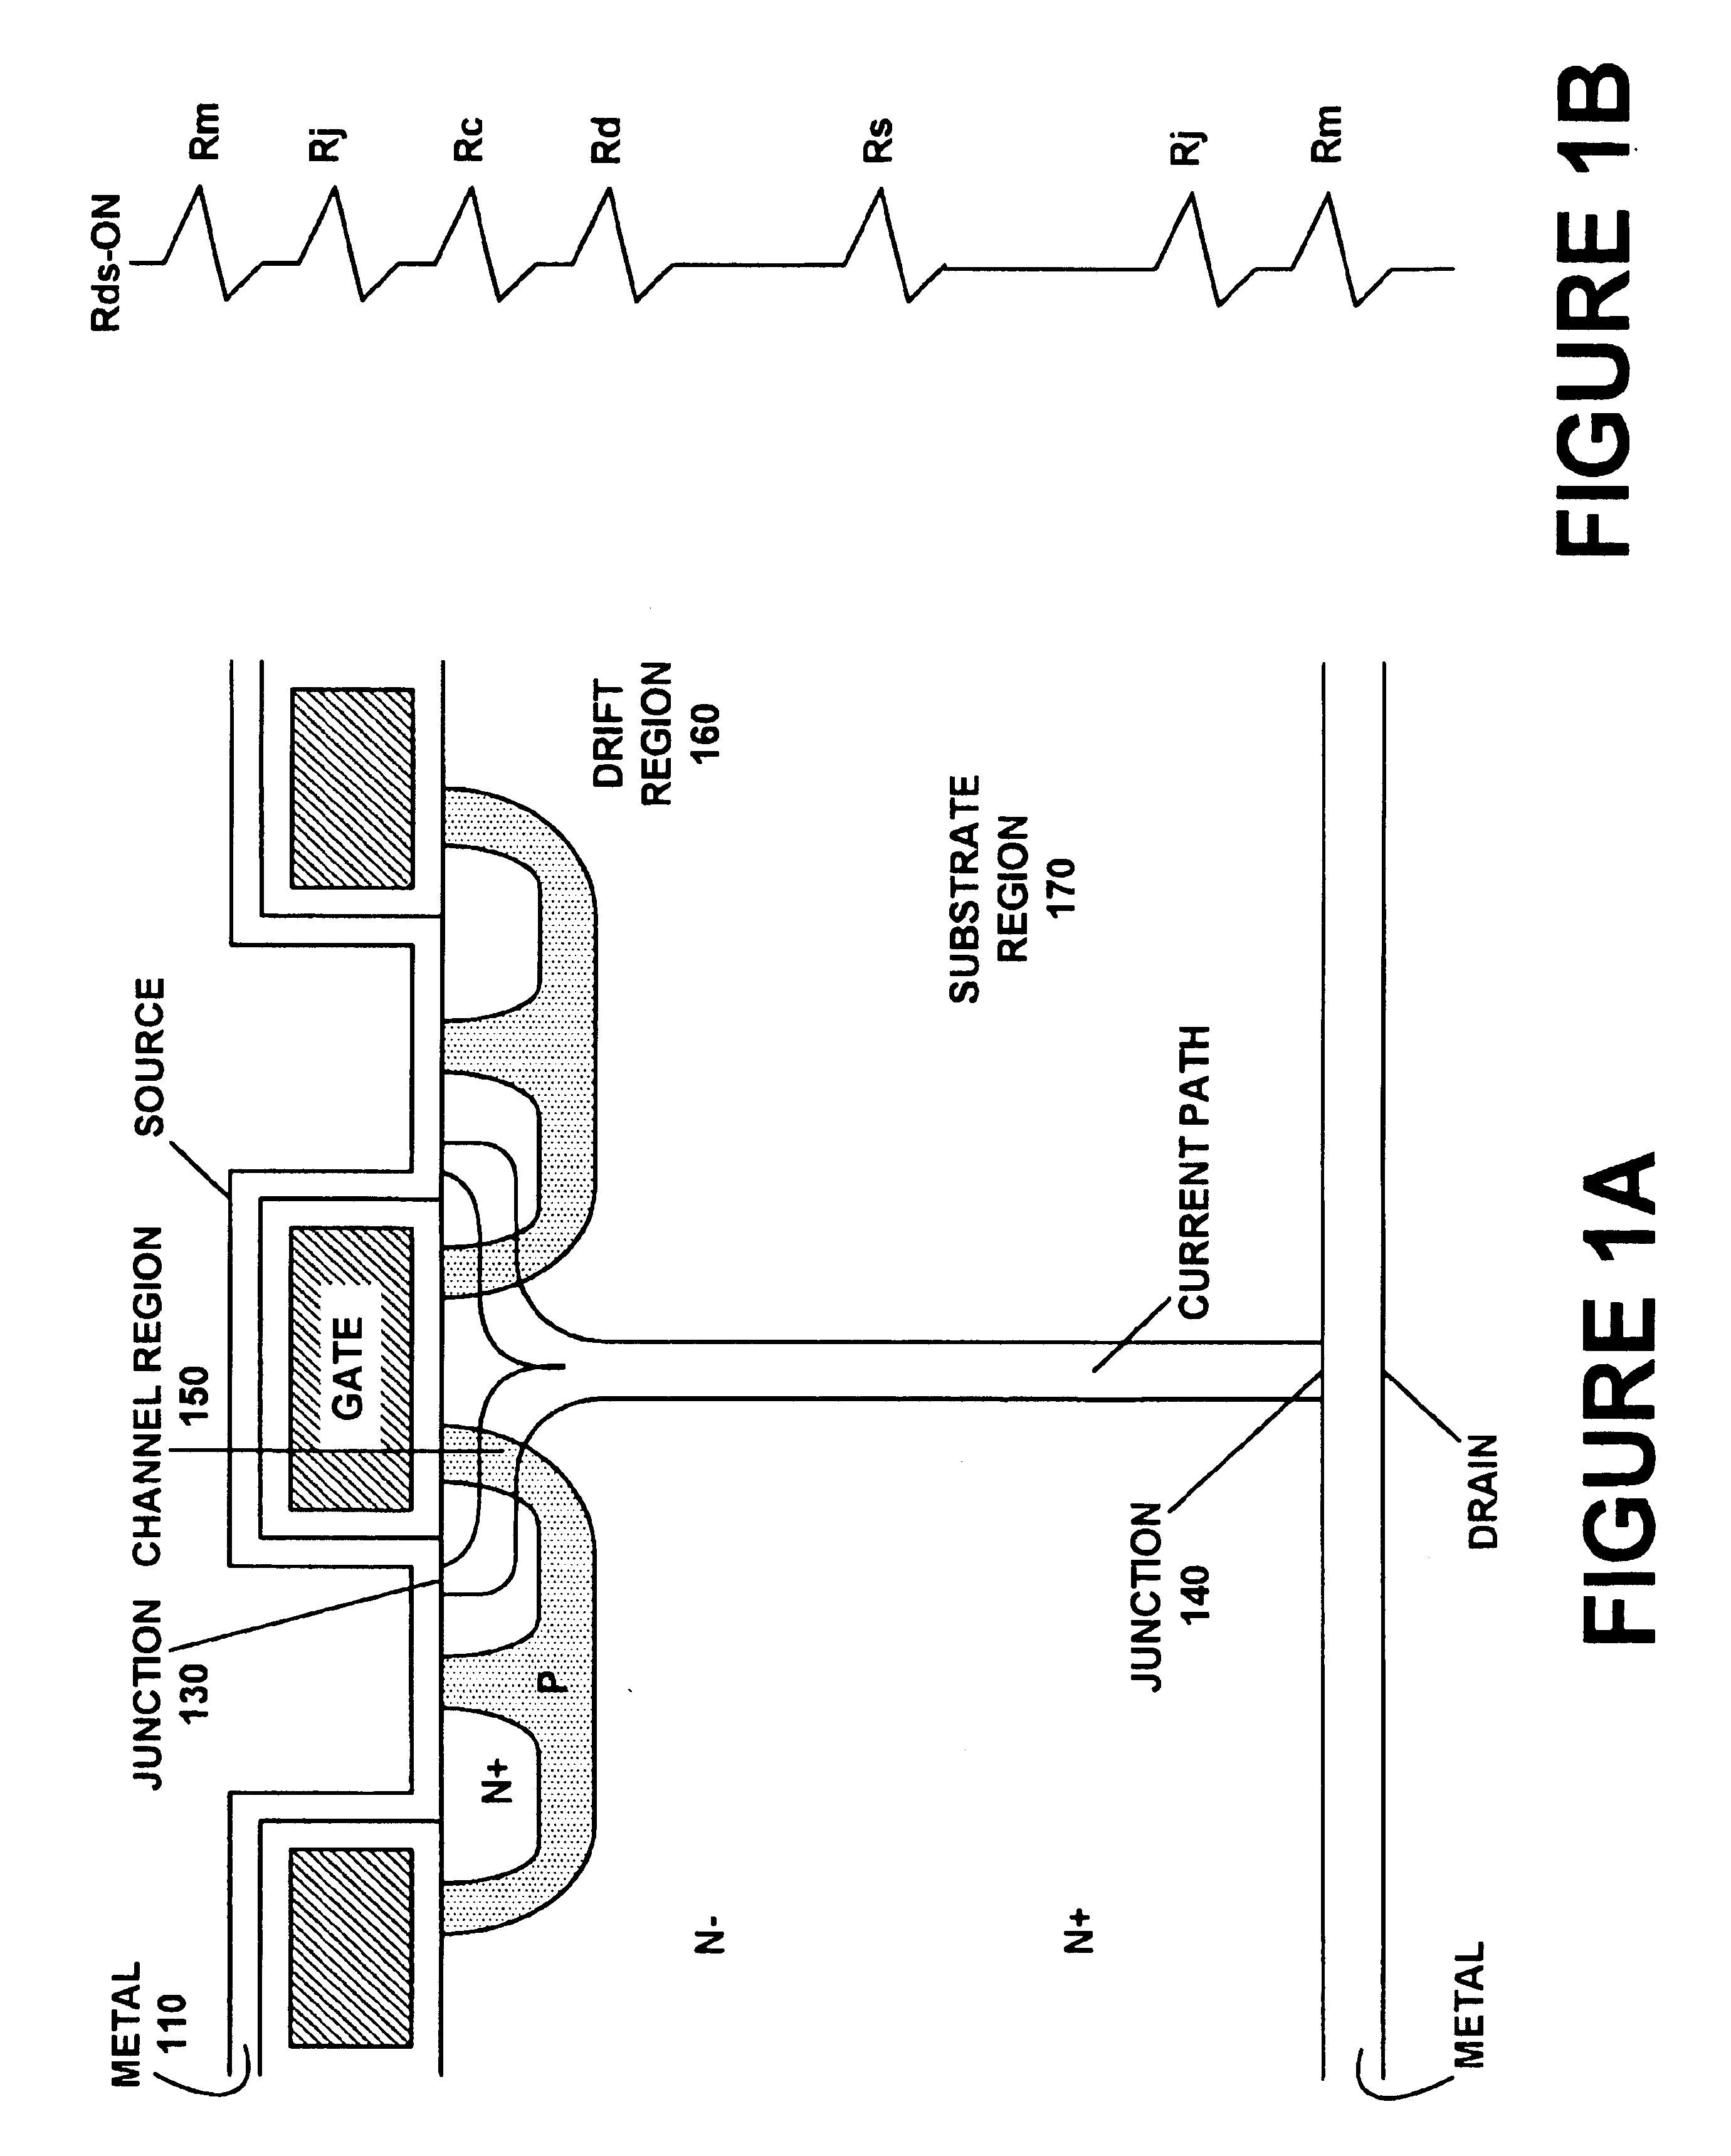 Semiconductor substrate with trenches for reducing substrate resistance